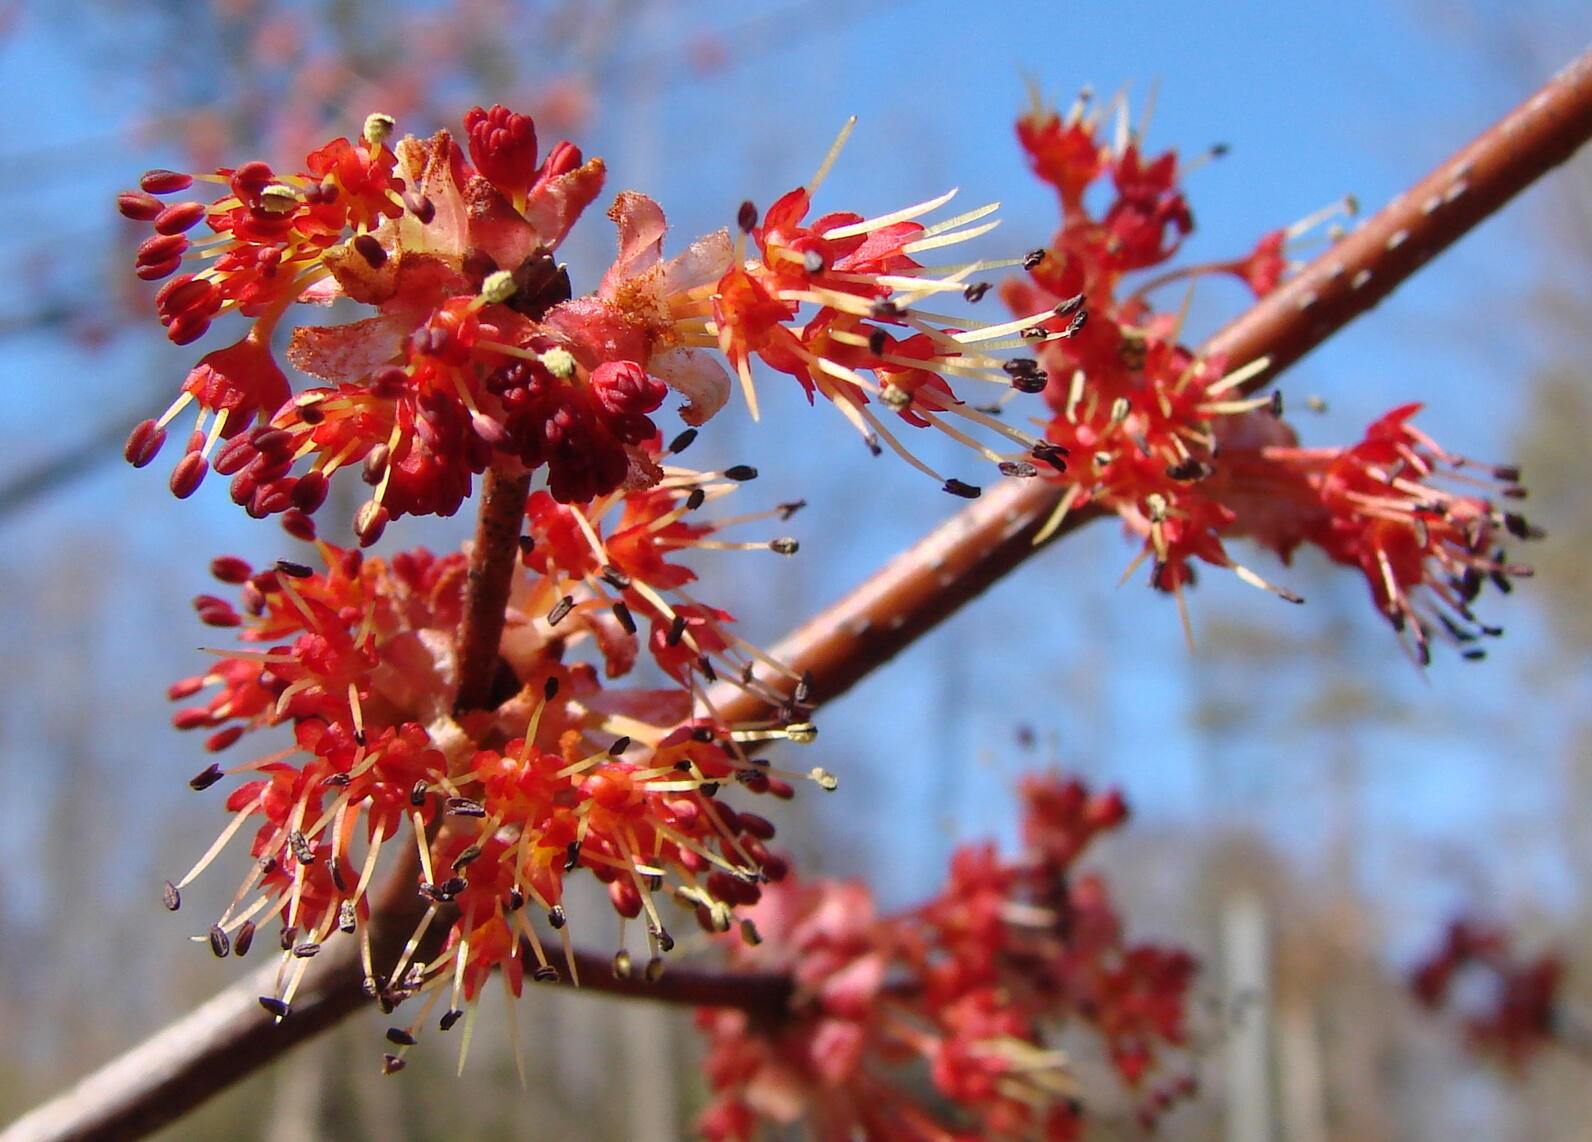 Red maple flowers against a bright blue sky.